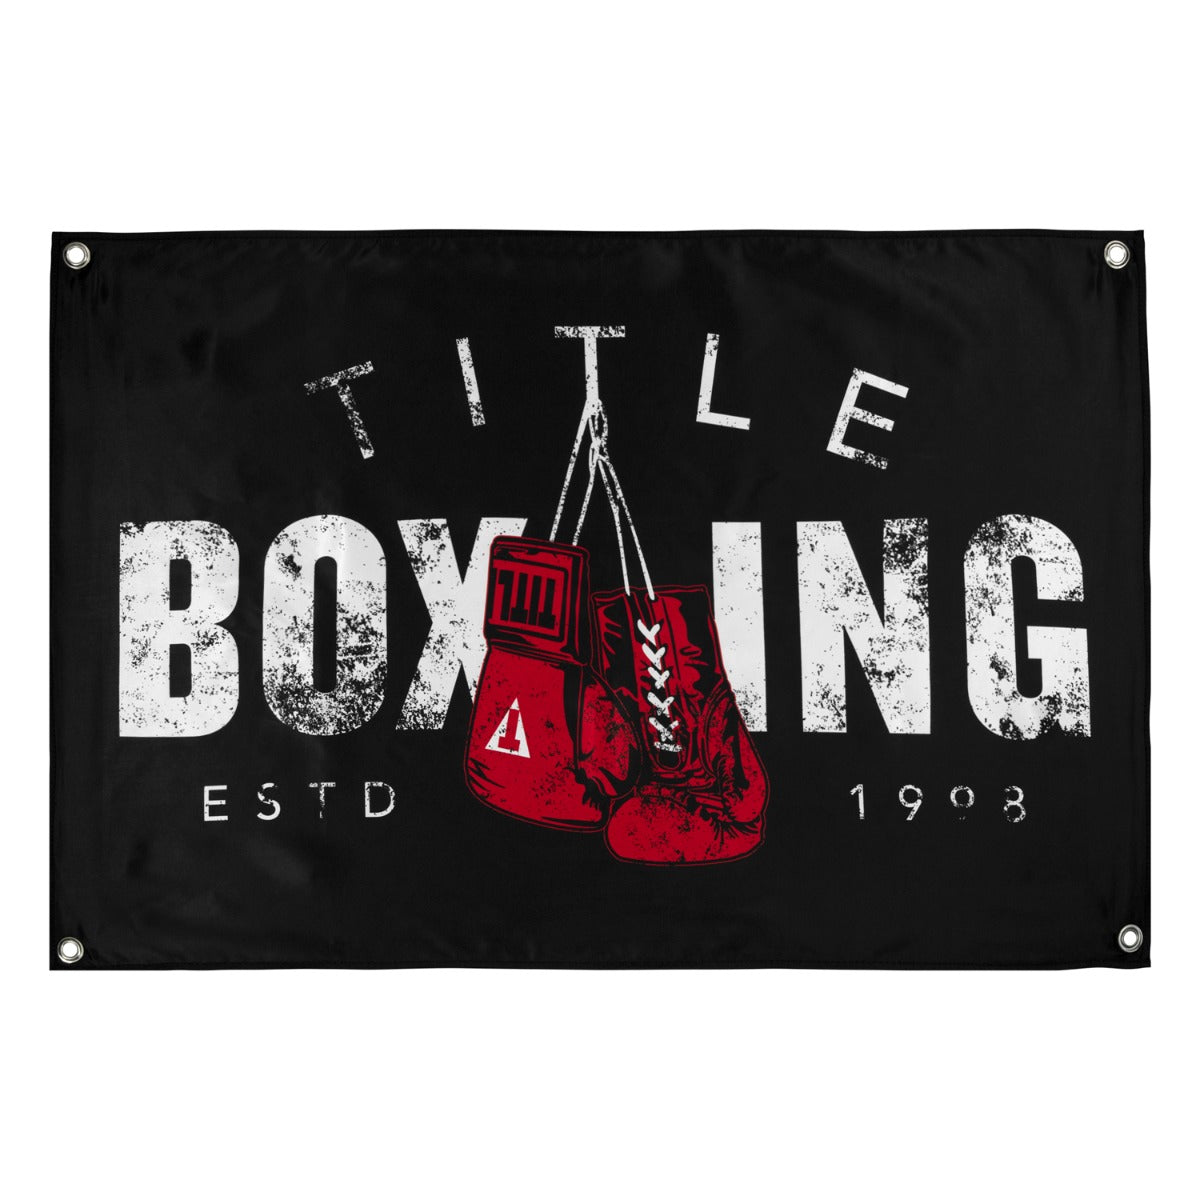 Banners, Decals & Patches: Boxing & MMA Banners | TITLE Boxing Gear